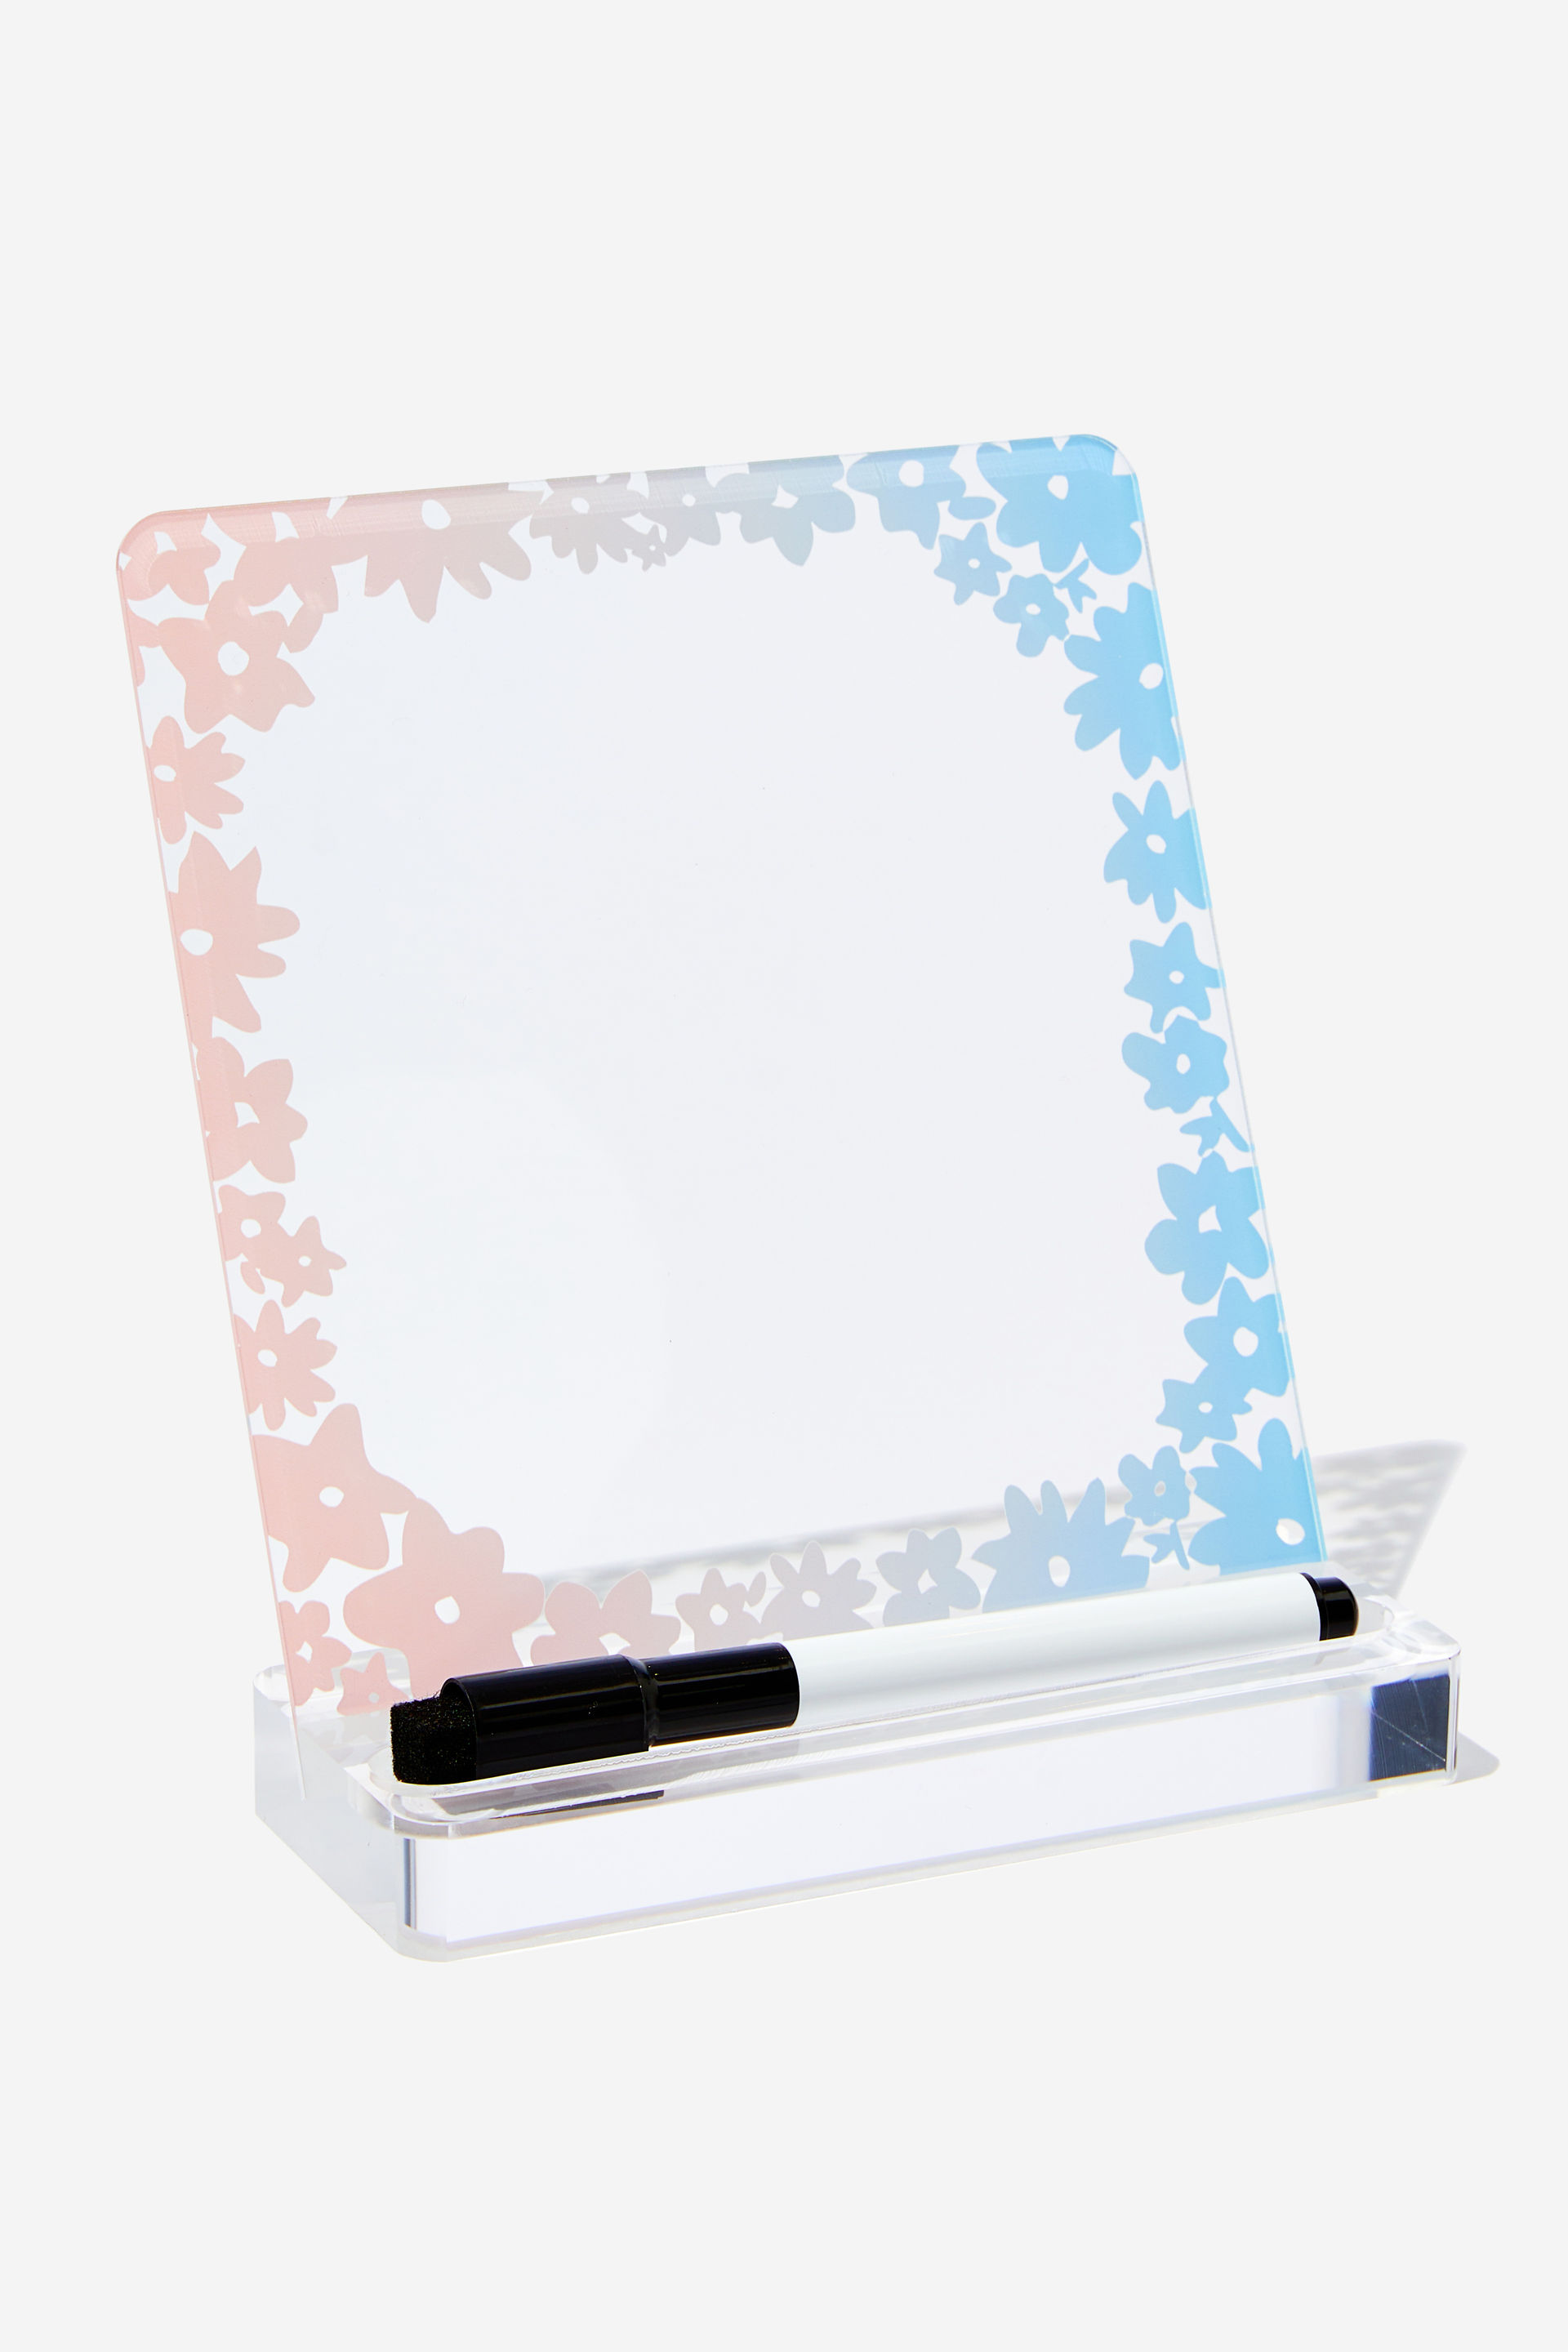 Typo - Acrylic Memo Stand - Pink and blue ombre floral